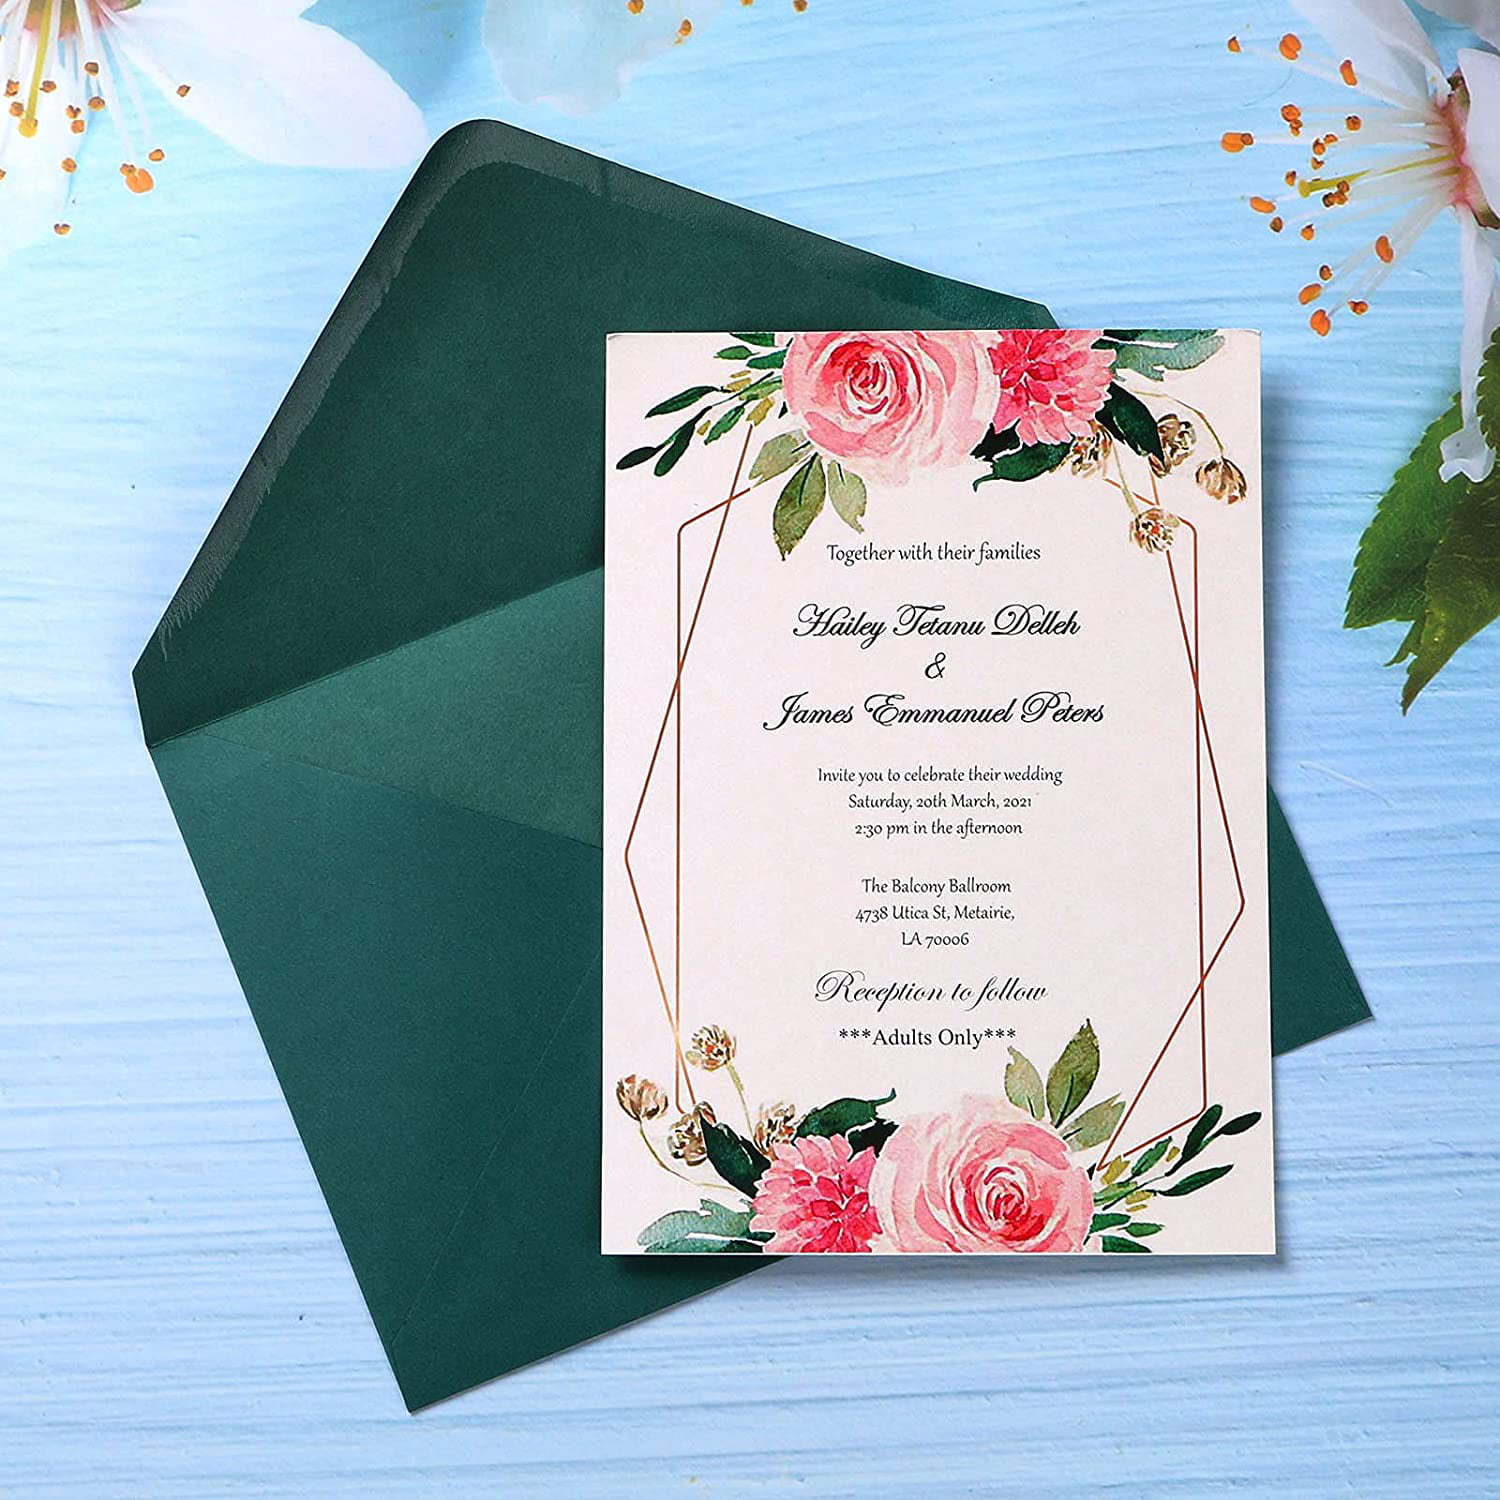 25 Party Invites with Envelopes - Double Sided Formal Invitations - B15212